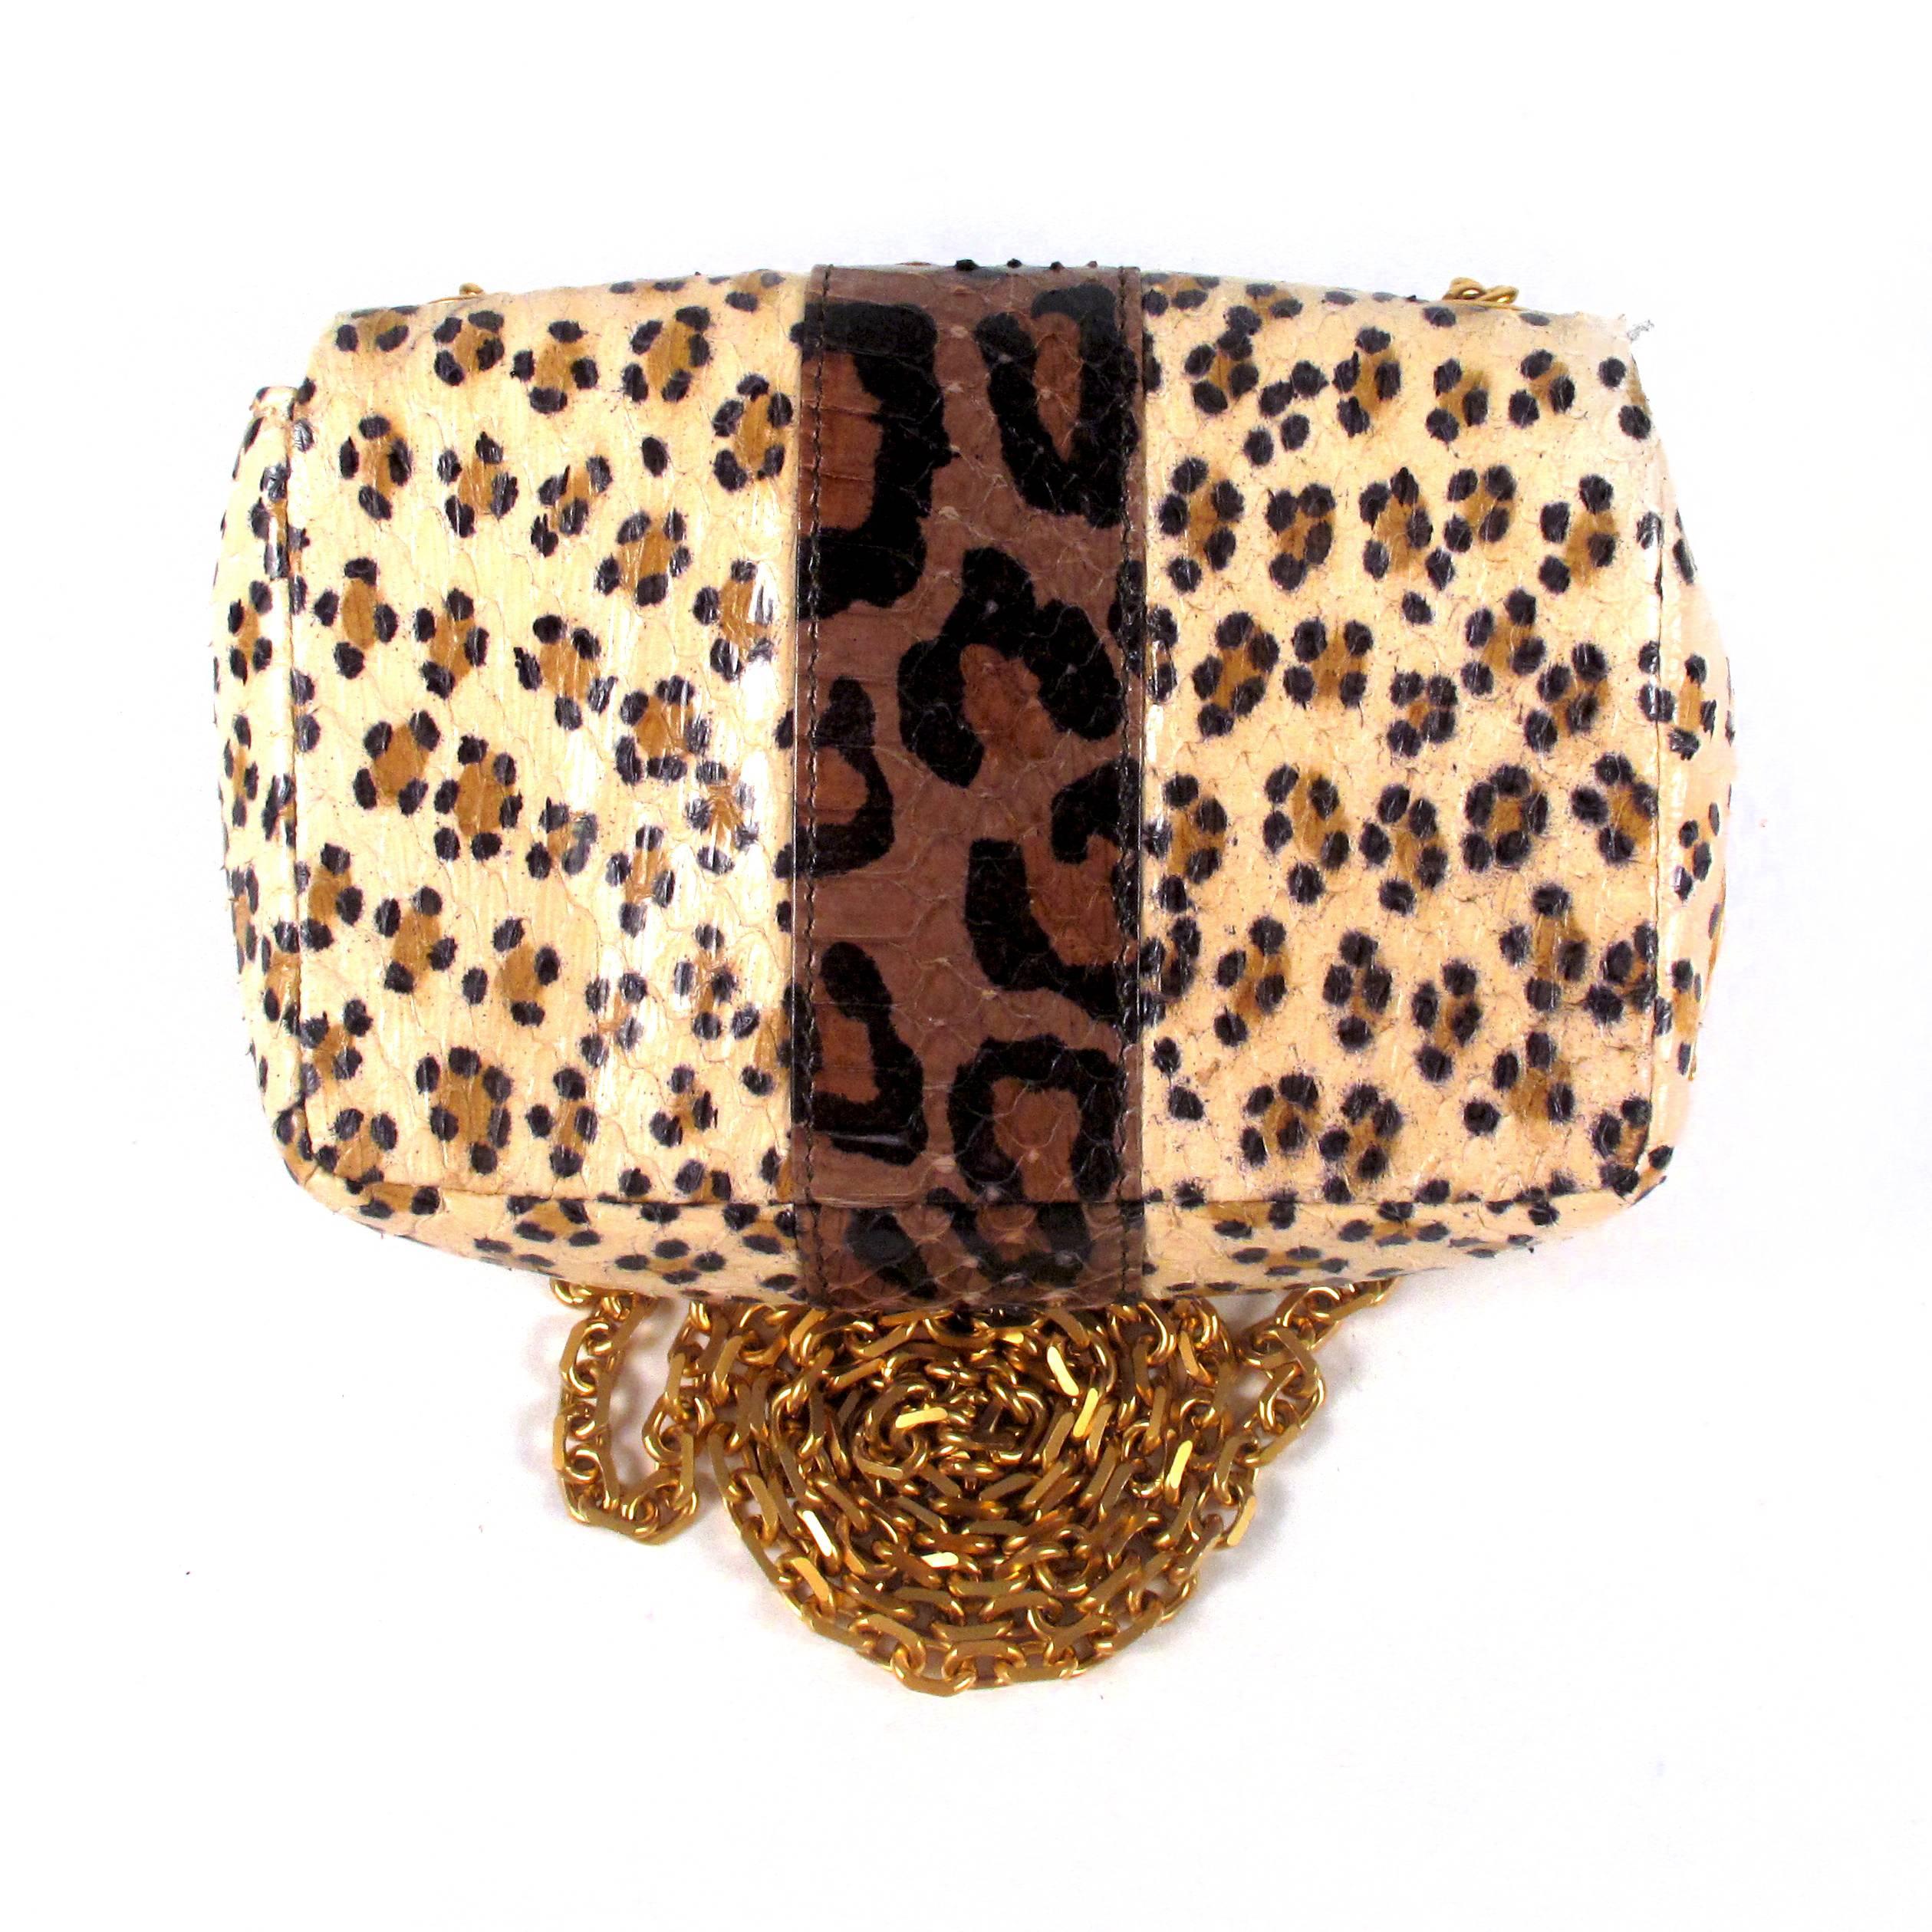 Christian Louboutin - Leopard Print Crossbody Bag

Color: Multi

Material: Leather

------------------------------------------------------------

Details:

- long crossbody chain shoulder strap

- gold tone hardware

- embossed pattern